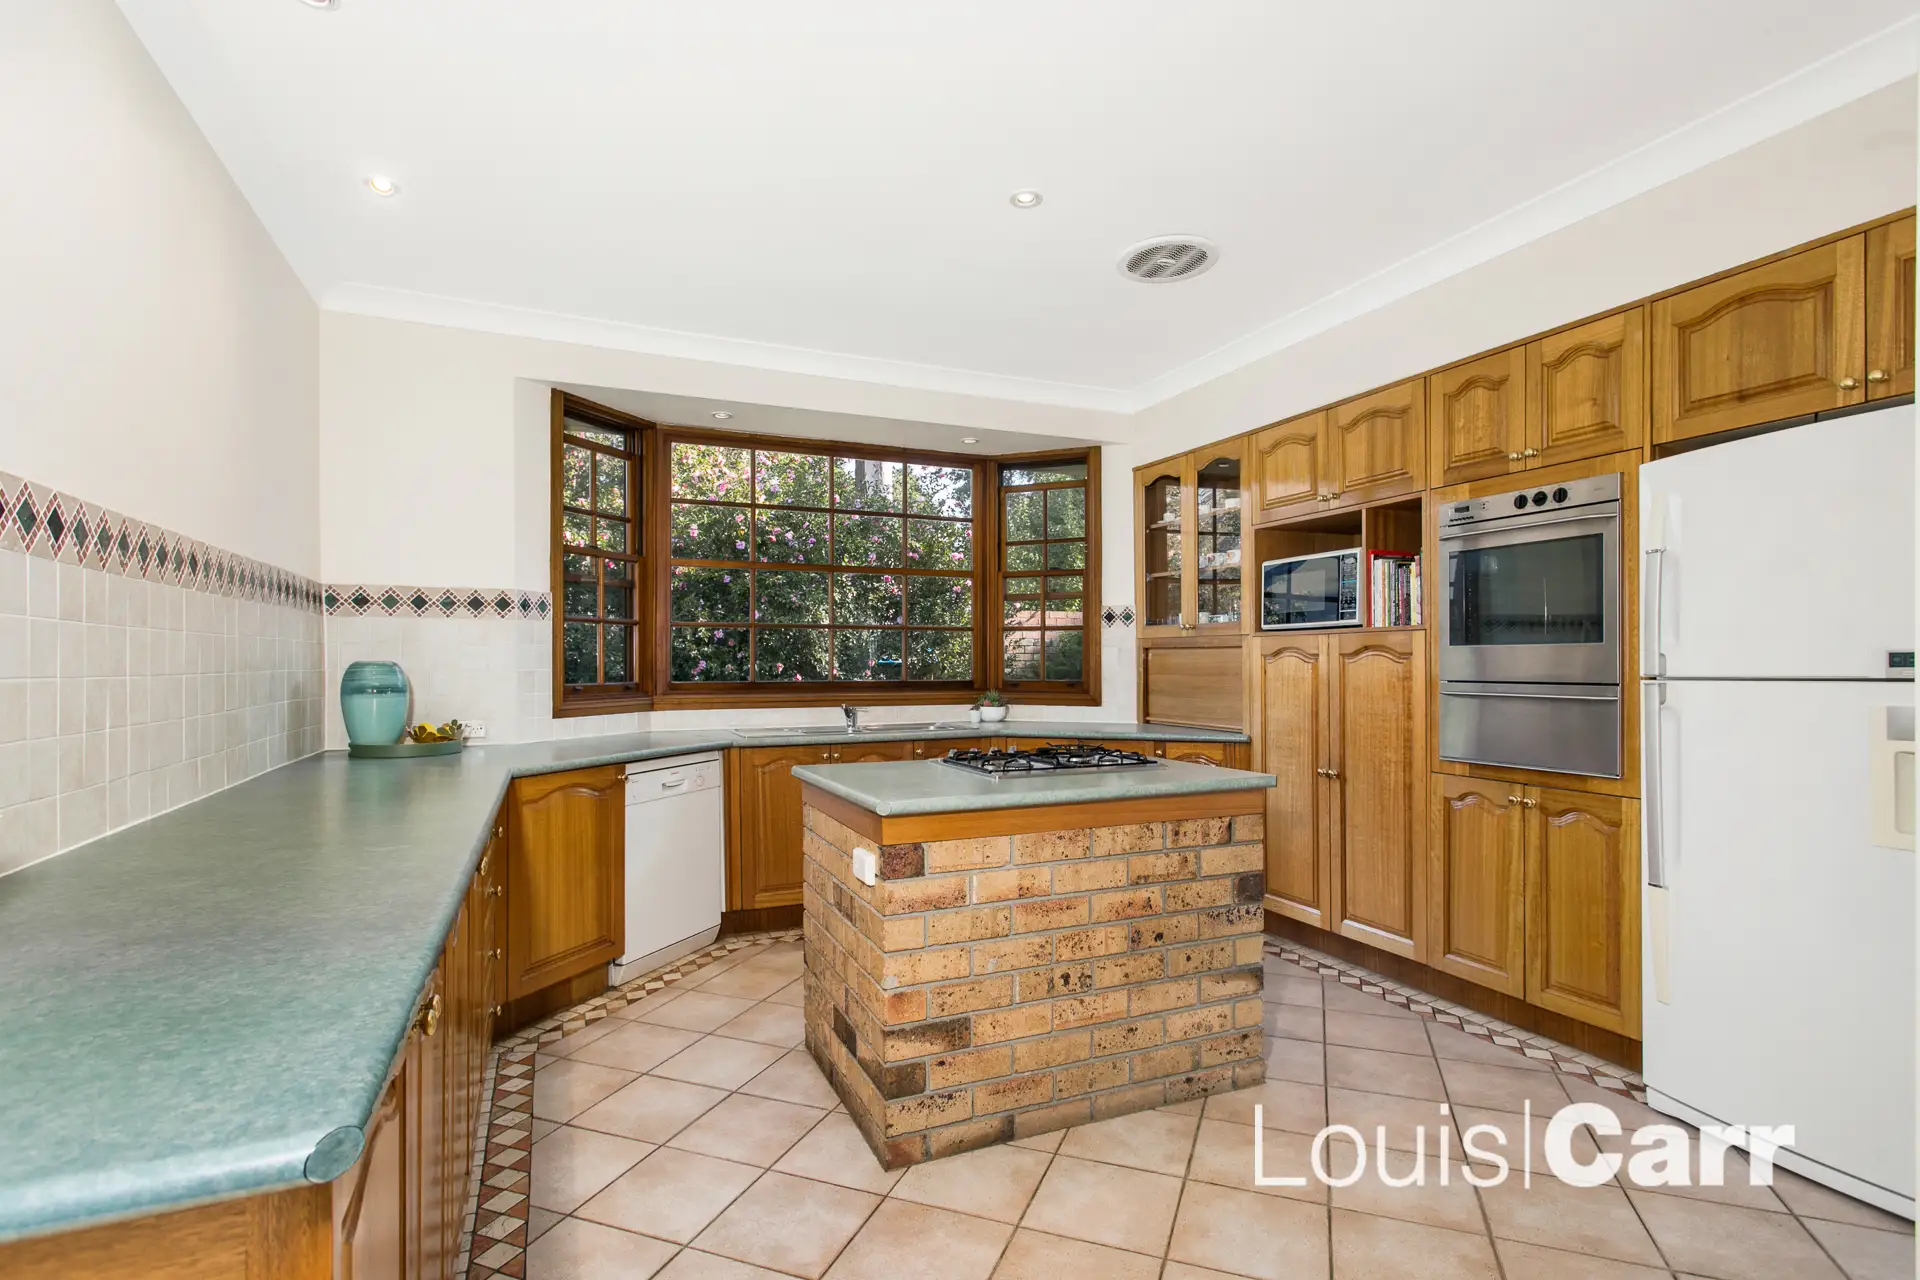 Photo #3: 33 Casuarina Drive, Cherrybrook - Sold by Louis Carr Real Estate